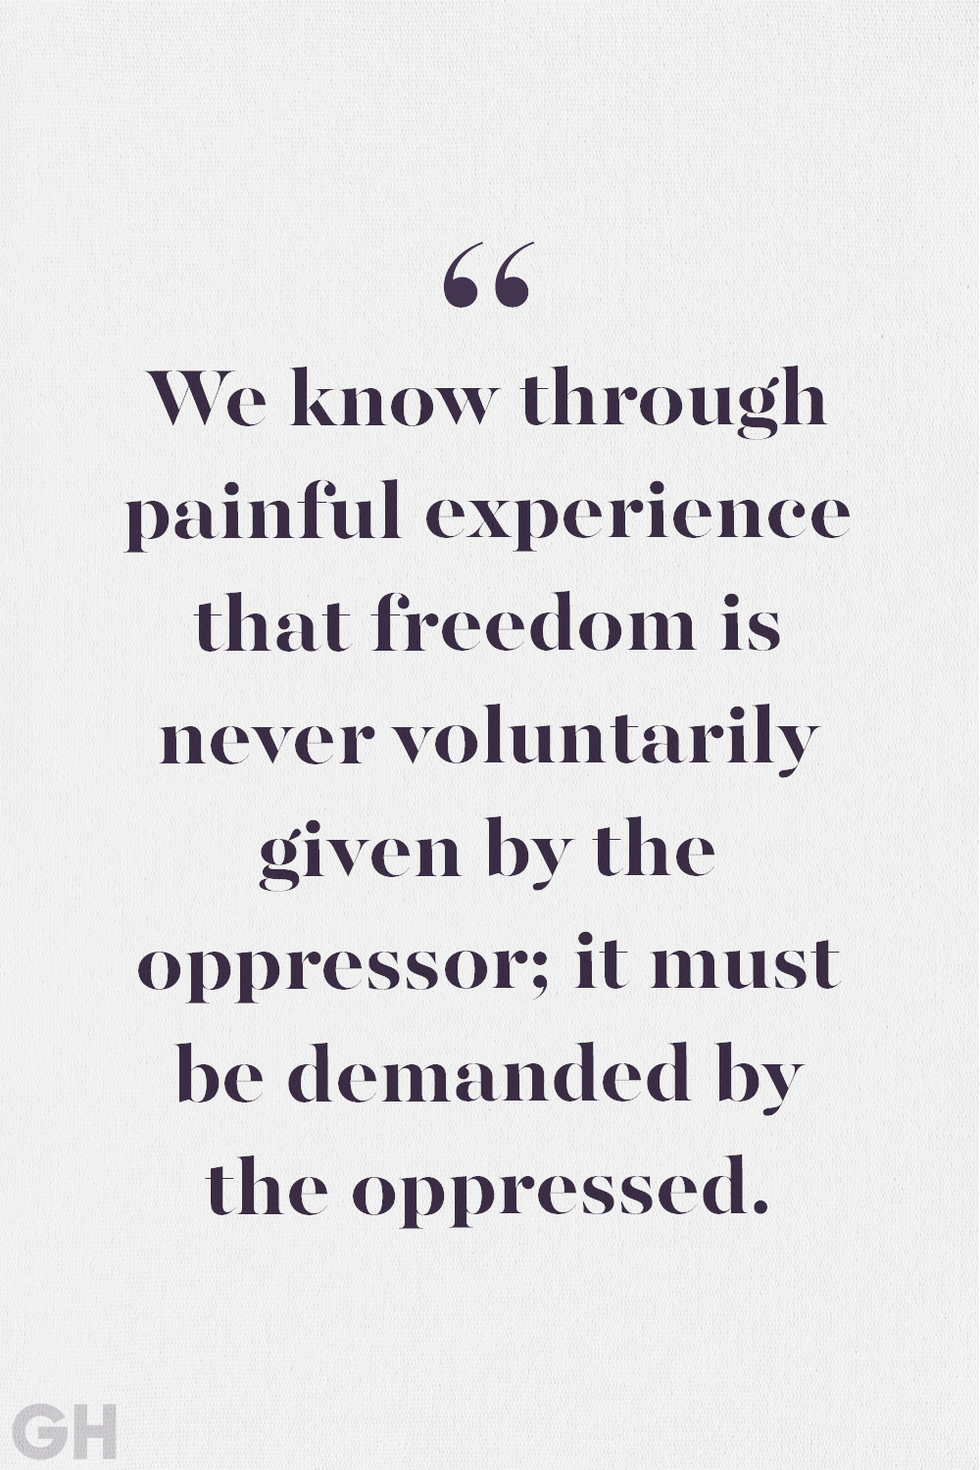 quote by martin luther king jr